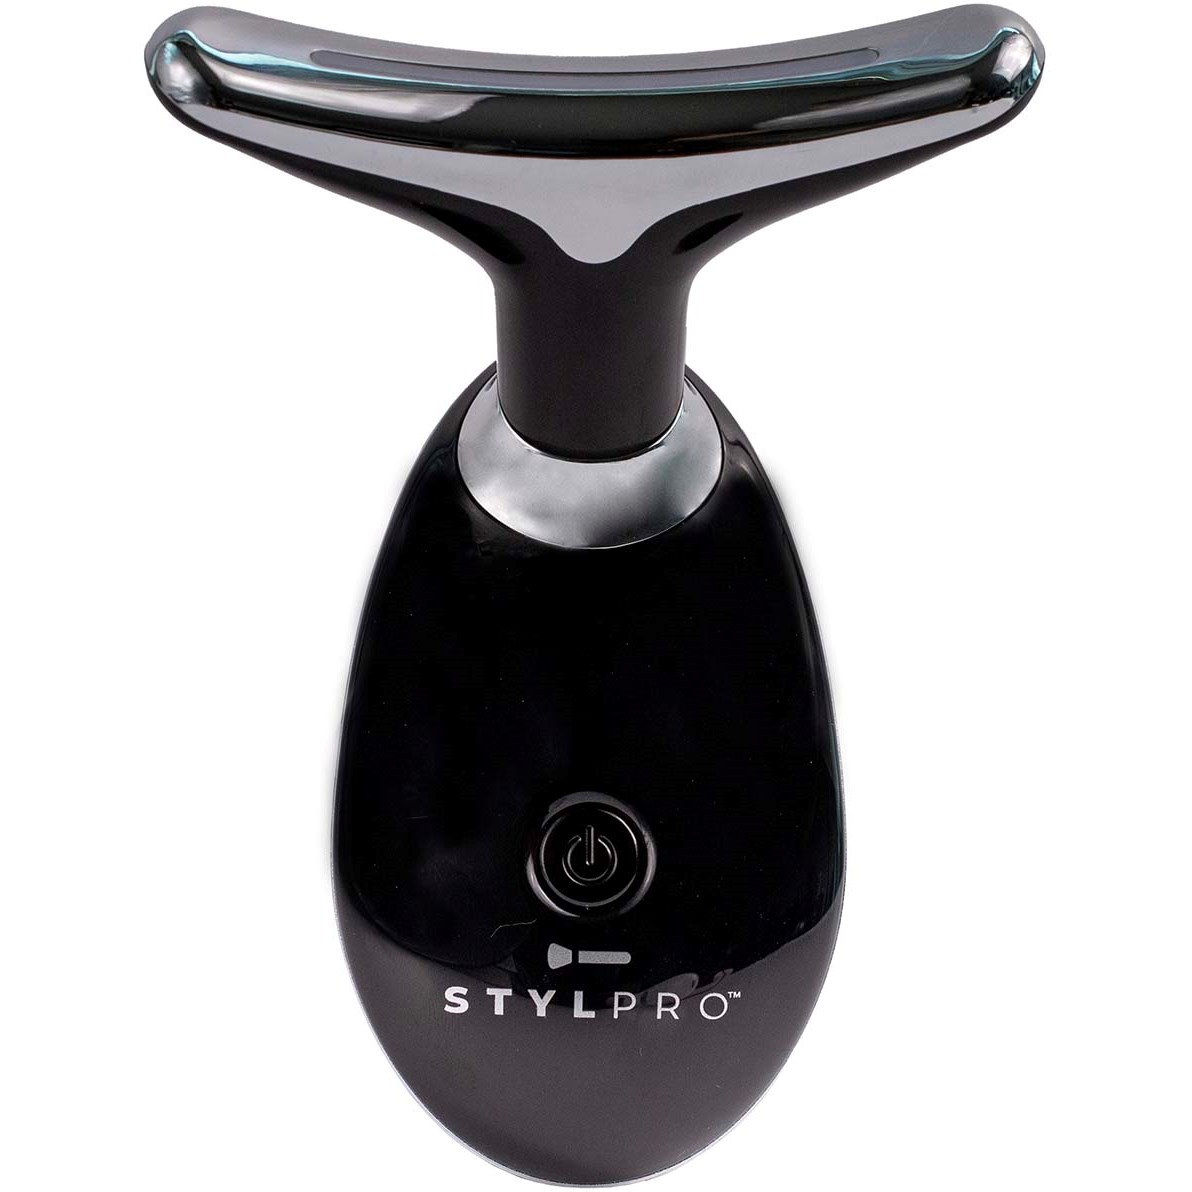 STYLPRO Fabulous Firmer Led Light Therapy